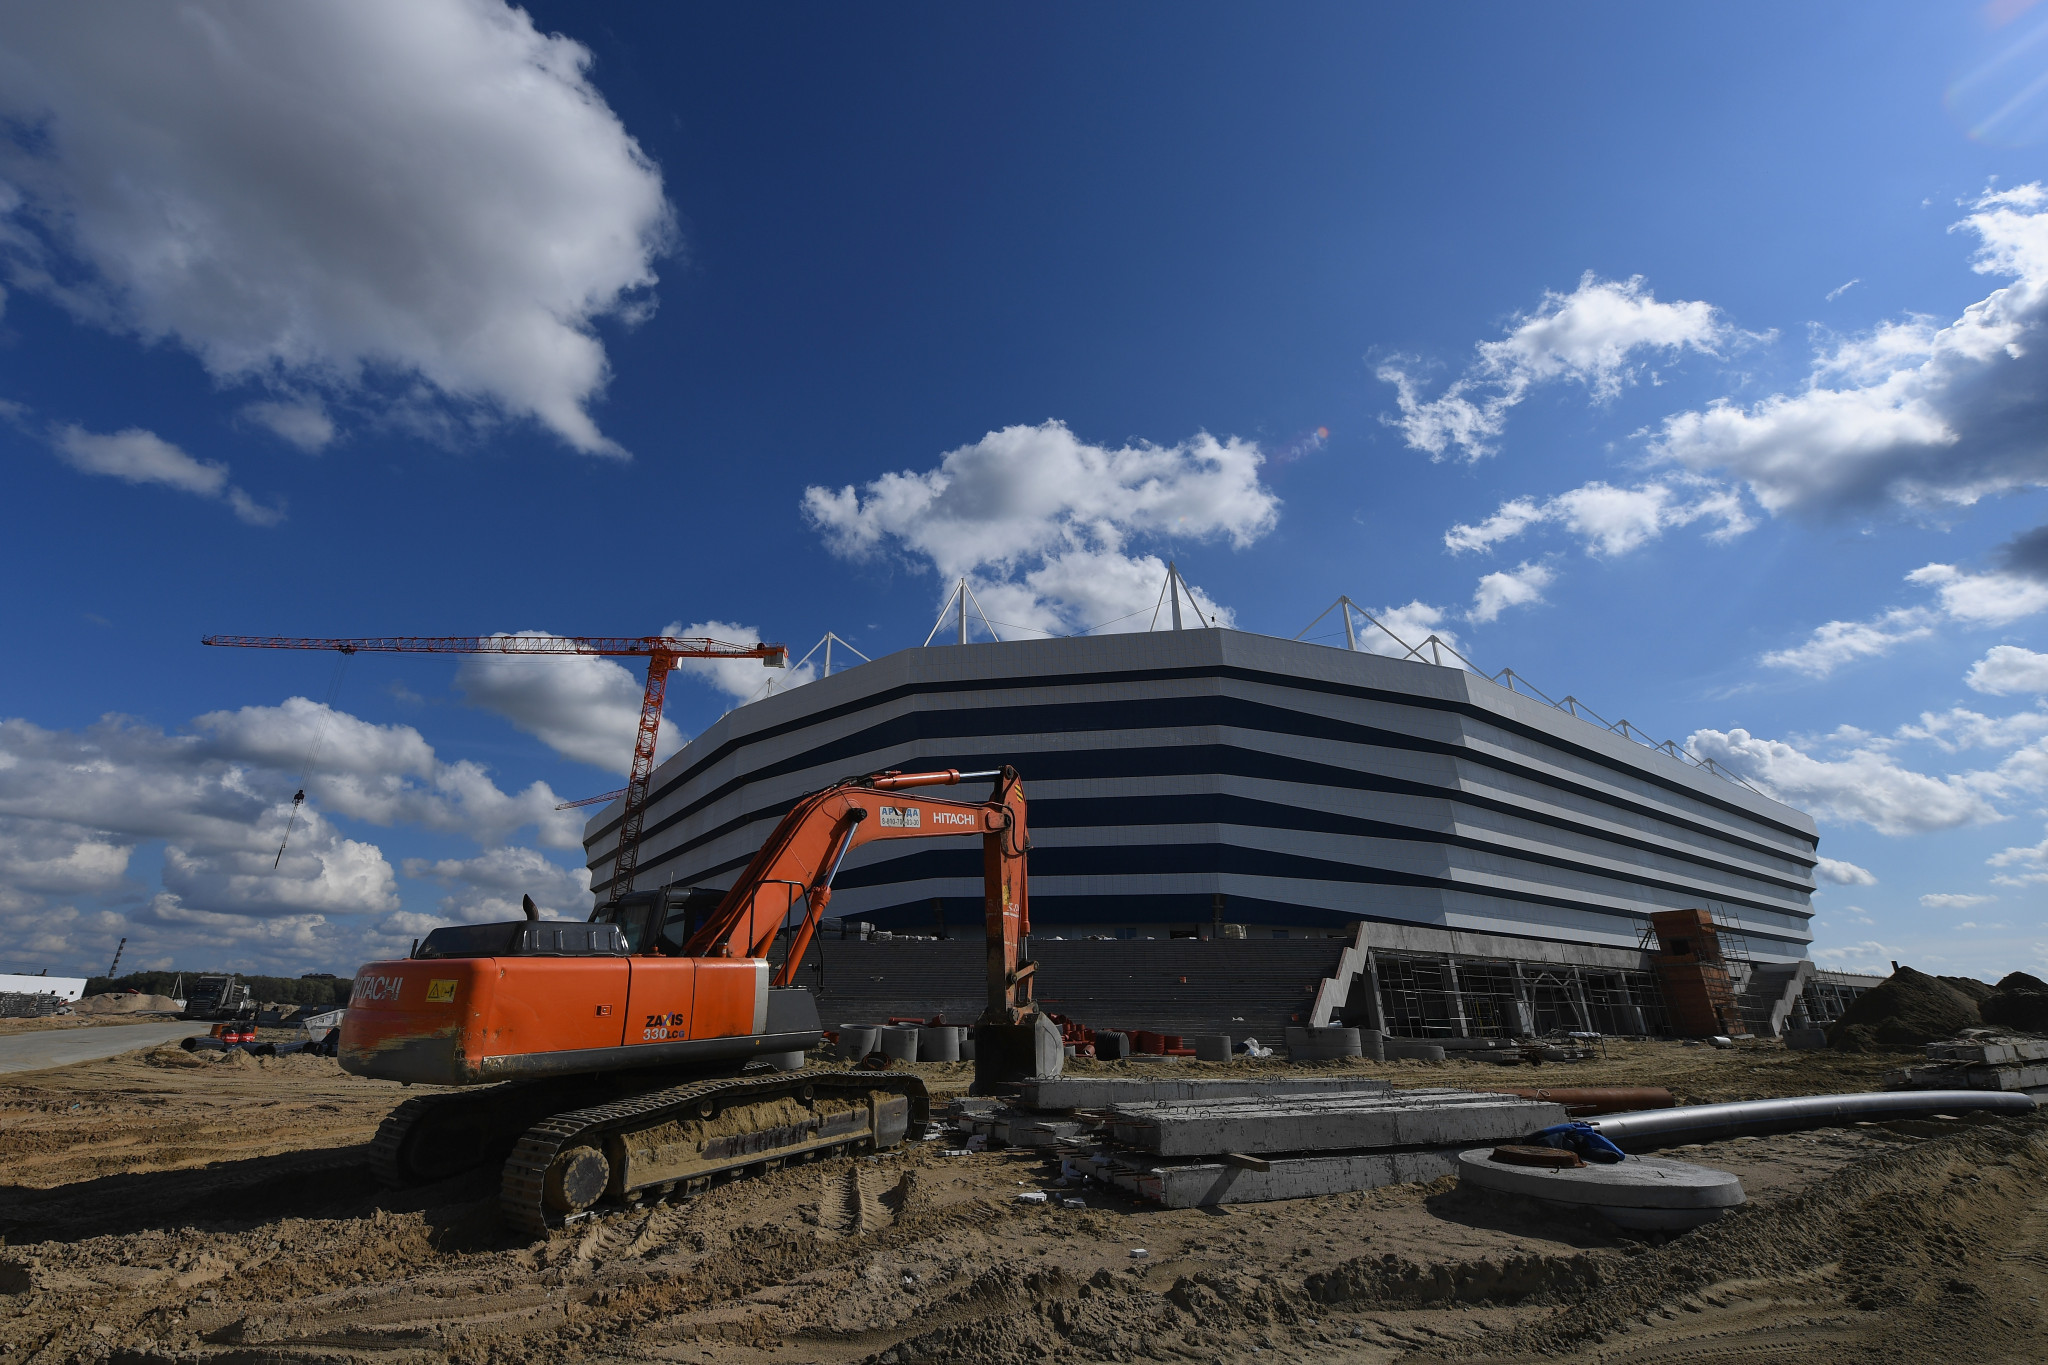 The World Cup stadium in Kaliningrad is still yet to be fully completed ©Getty Images